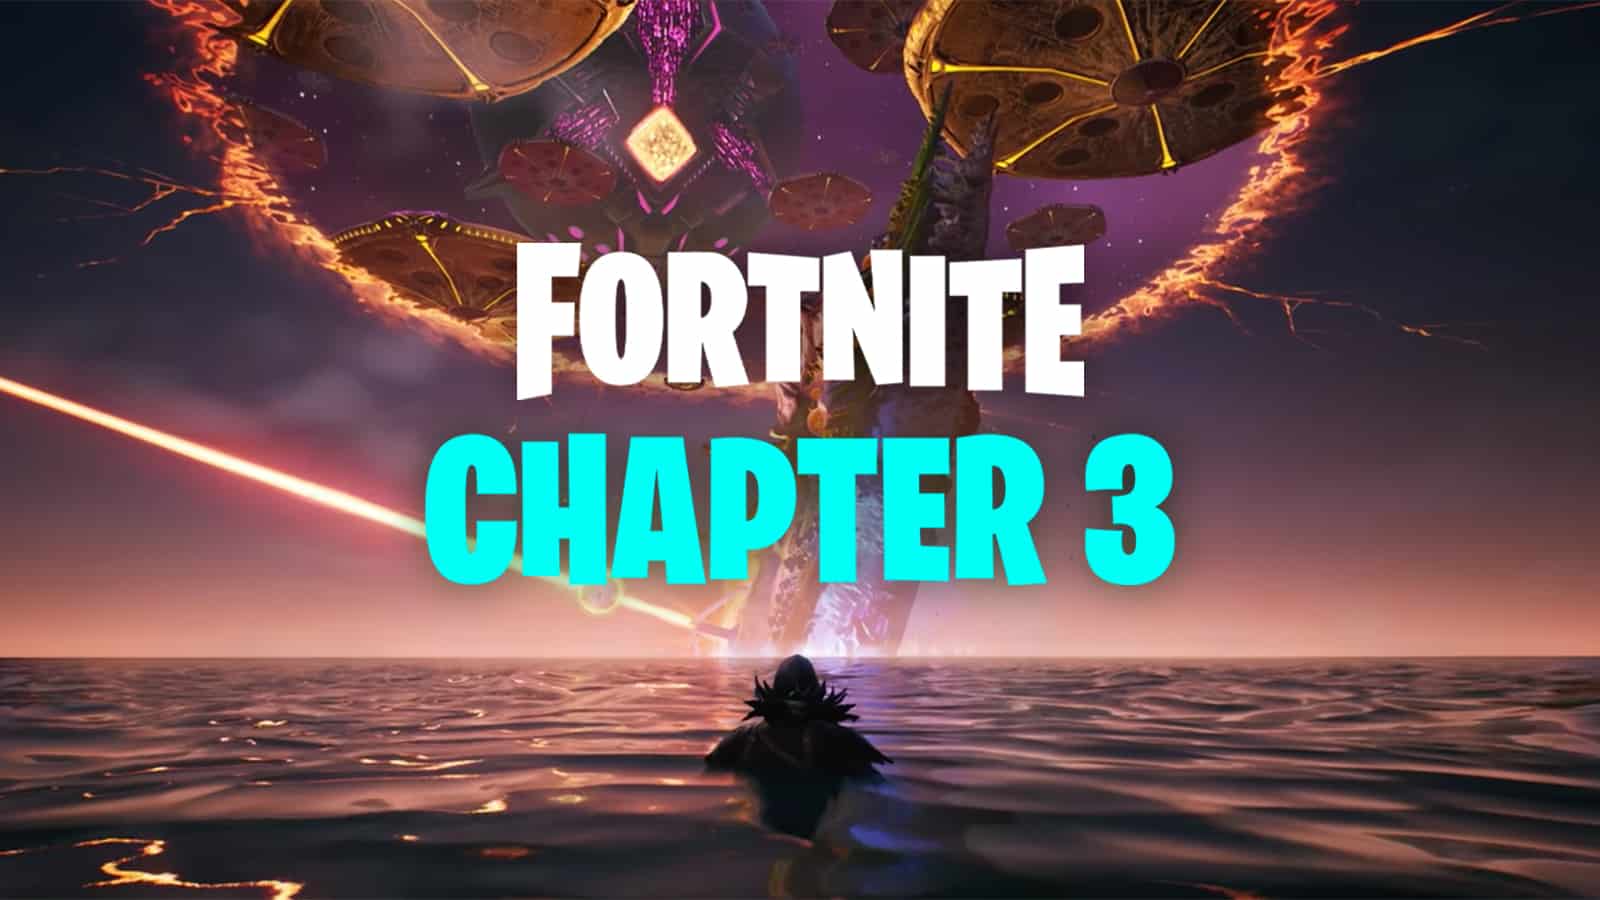 The Fortnite Chapter 3 logo on a loading screen